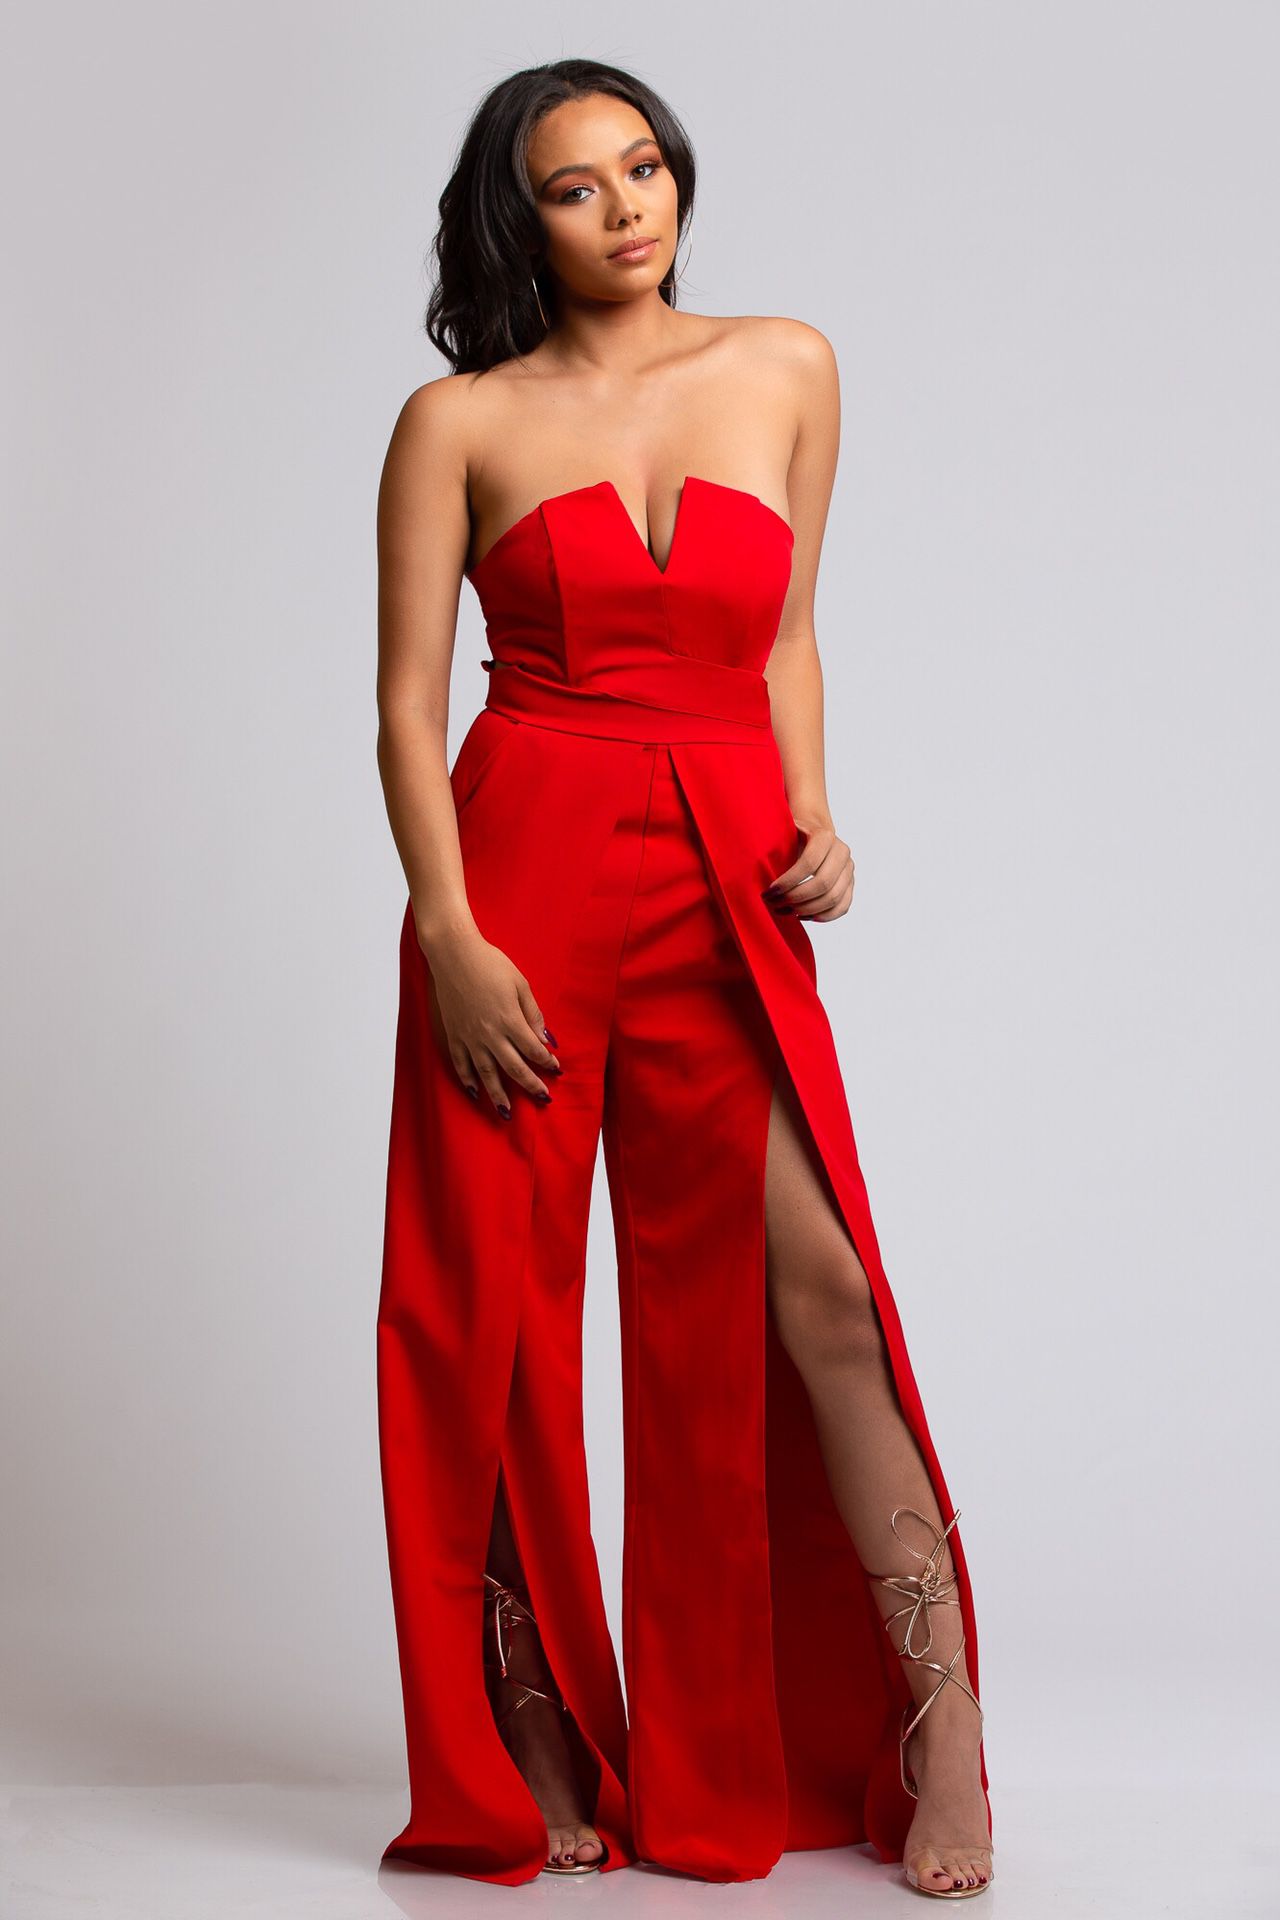 NEW - Women’s Red Jumpsuit for Sale in Los Angeles, CA - OfferUp